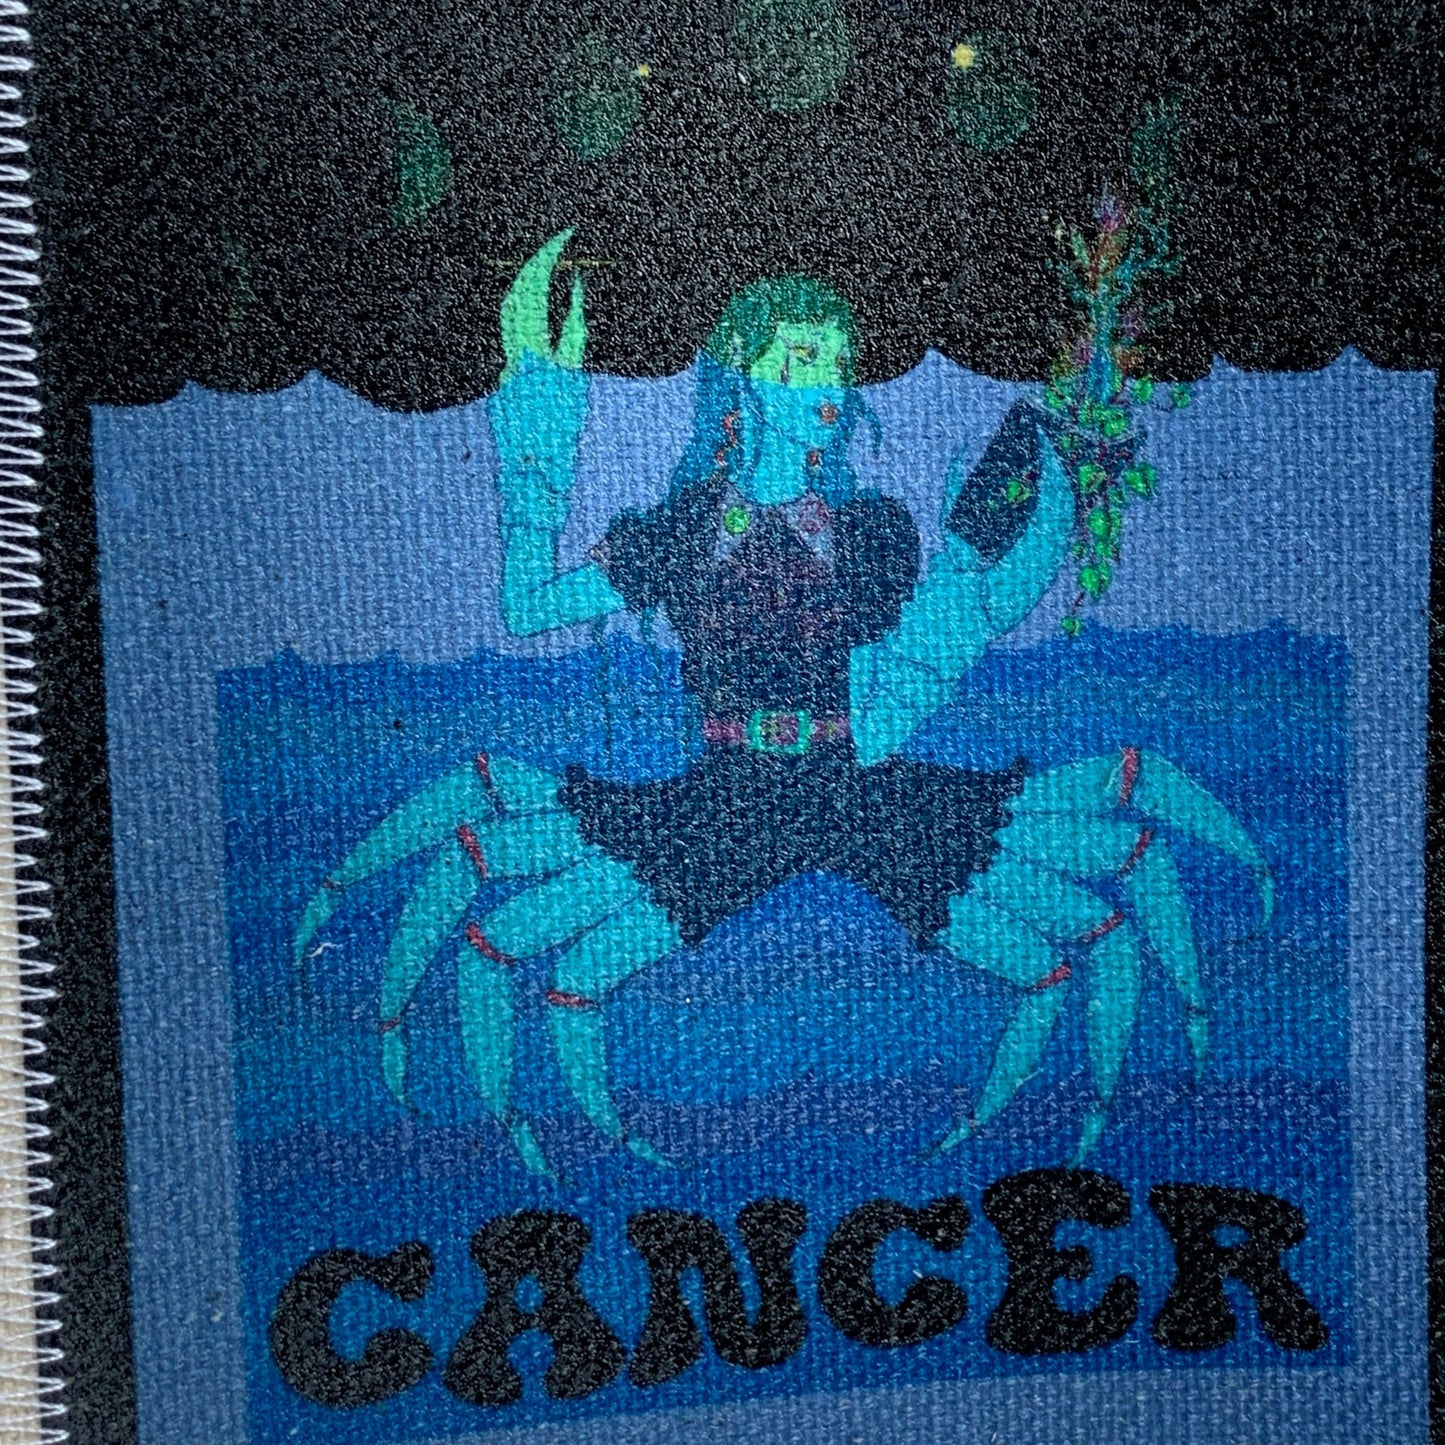 Cancer Patch